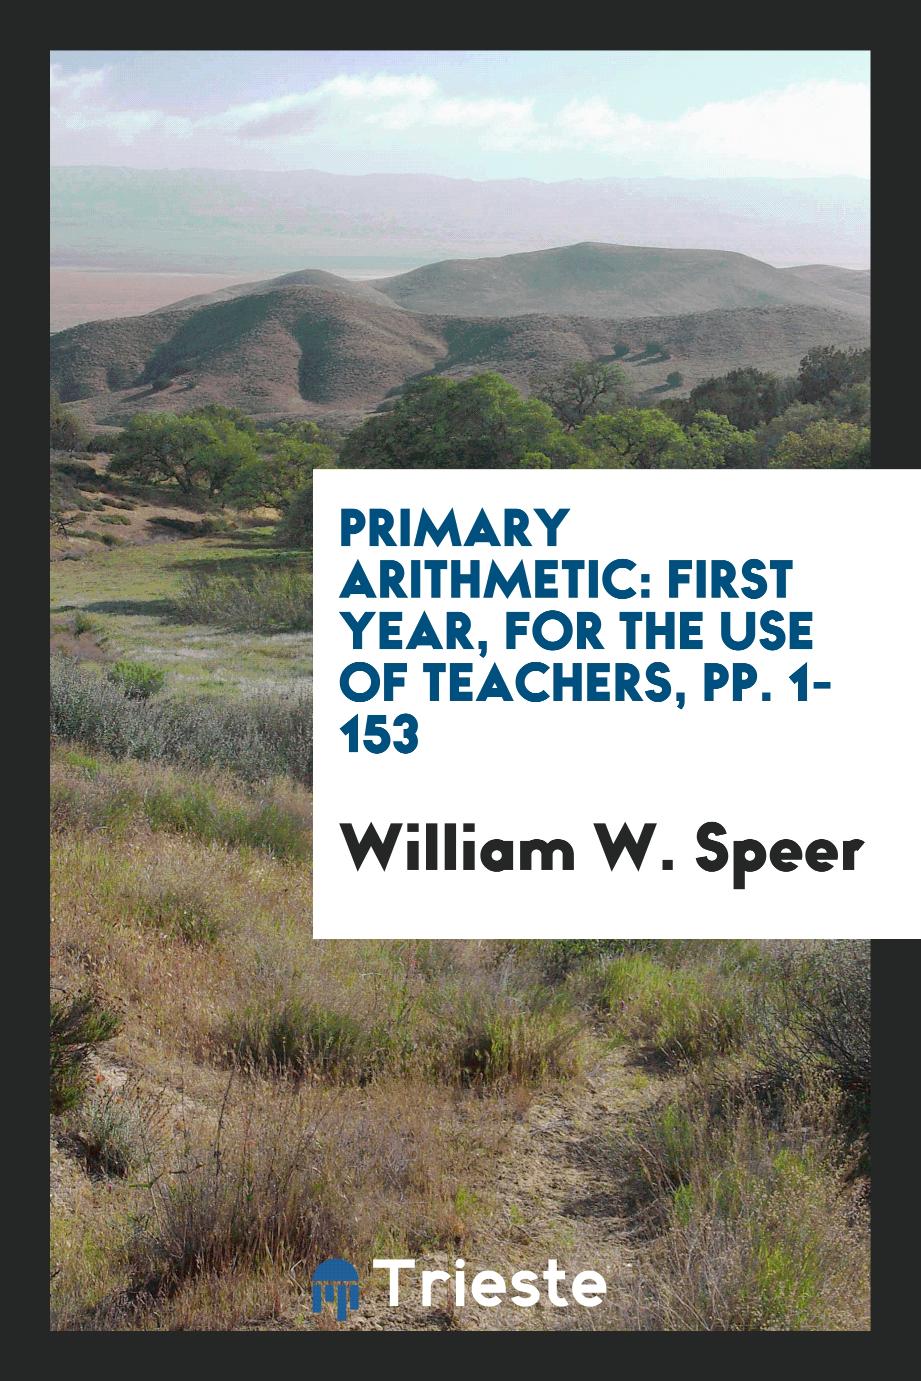 Primary Arithmetic: First Year, for the Use of Teachers, pp. 1-153